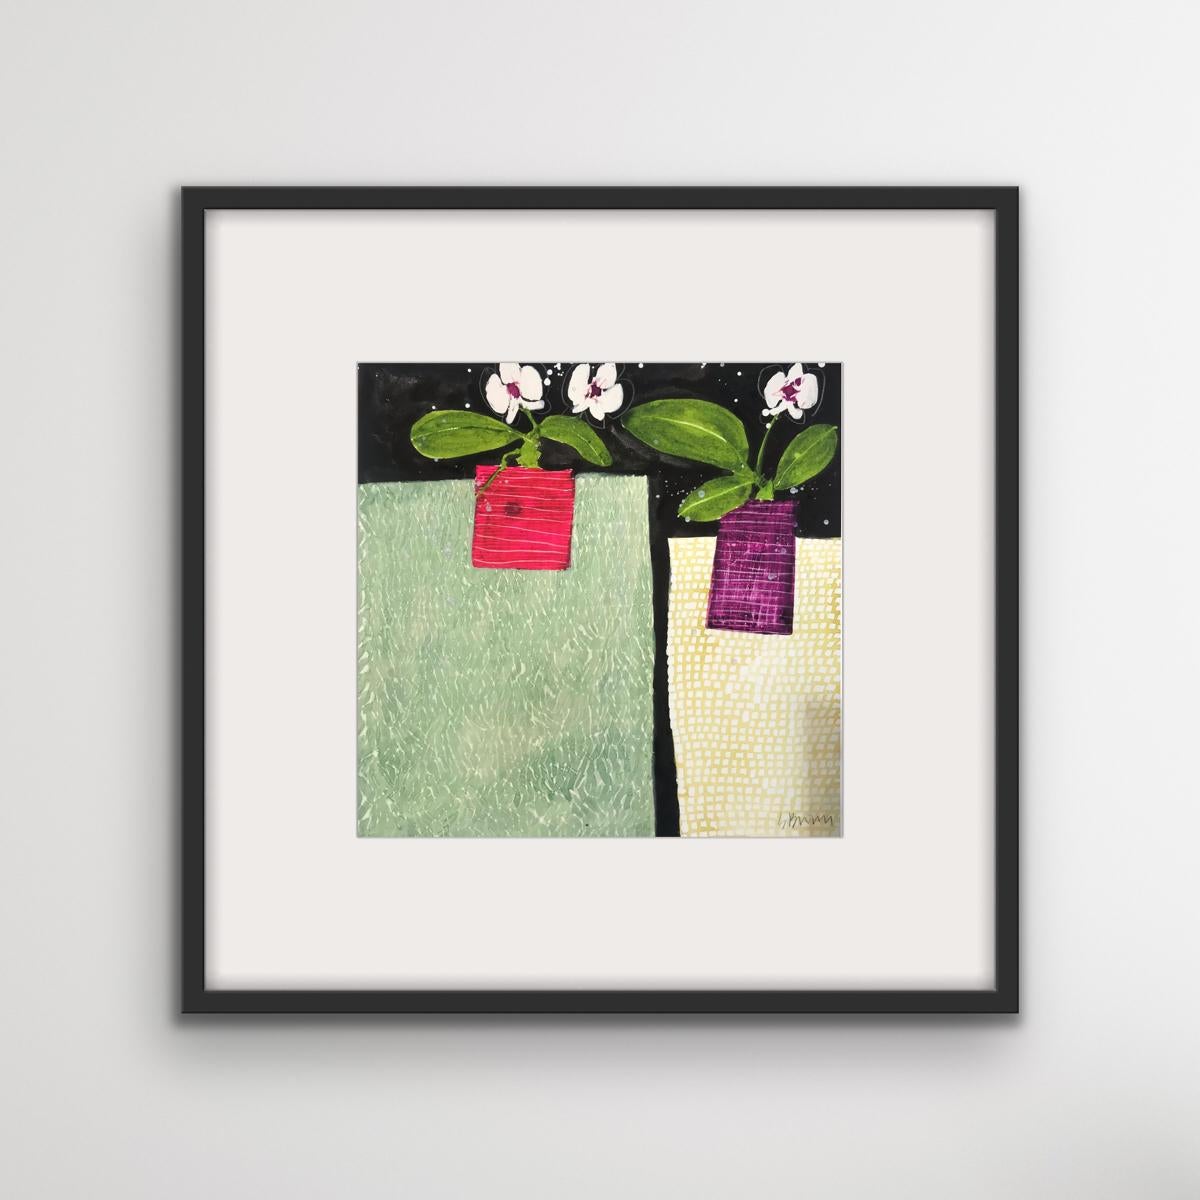 Harmony is a limited edition giclée print by artist Susan Brown, featuring a composition of two vases in an abstracted still life. Each vase contains a cluster of orchid flowers in a cubist style. 

Discover limited edition giclée prints online with